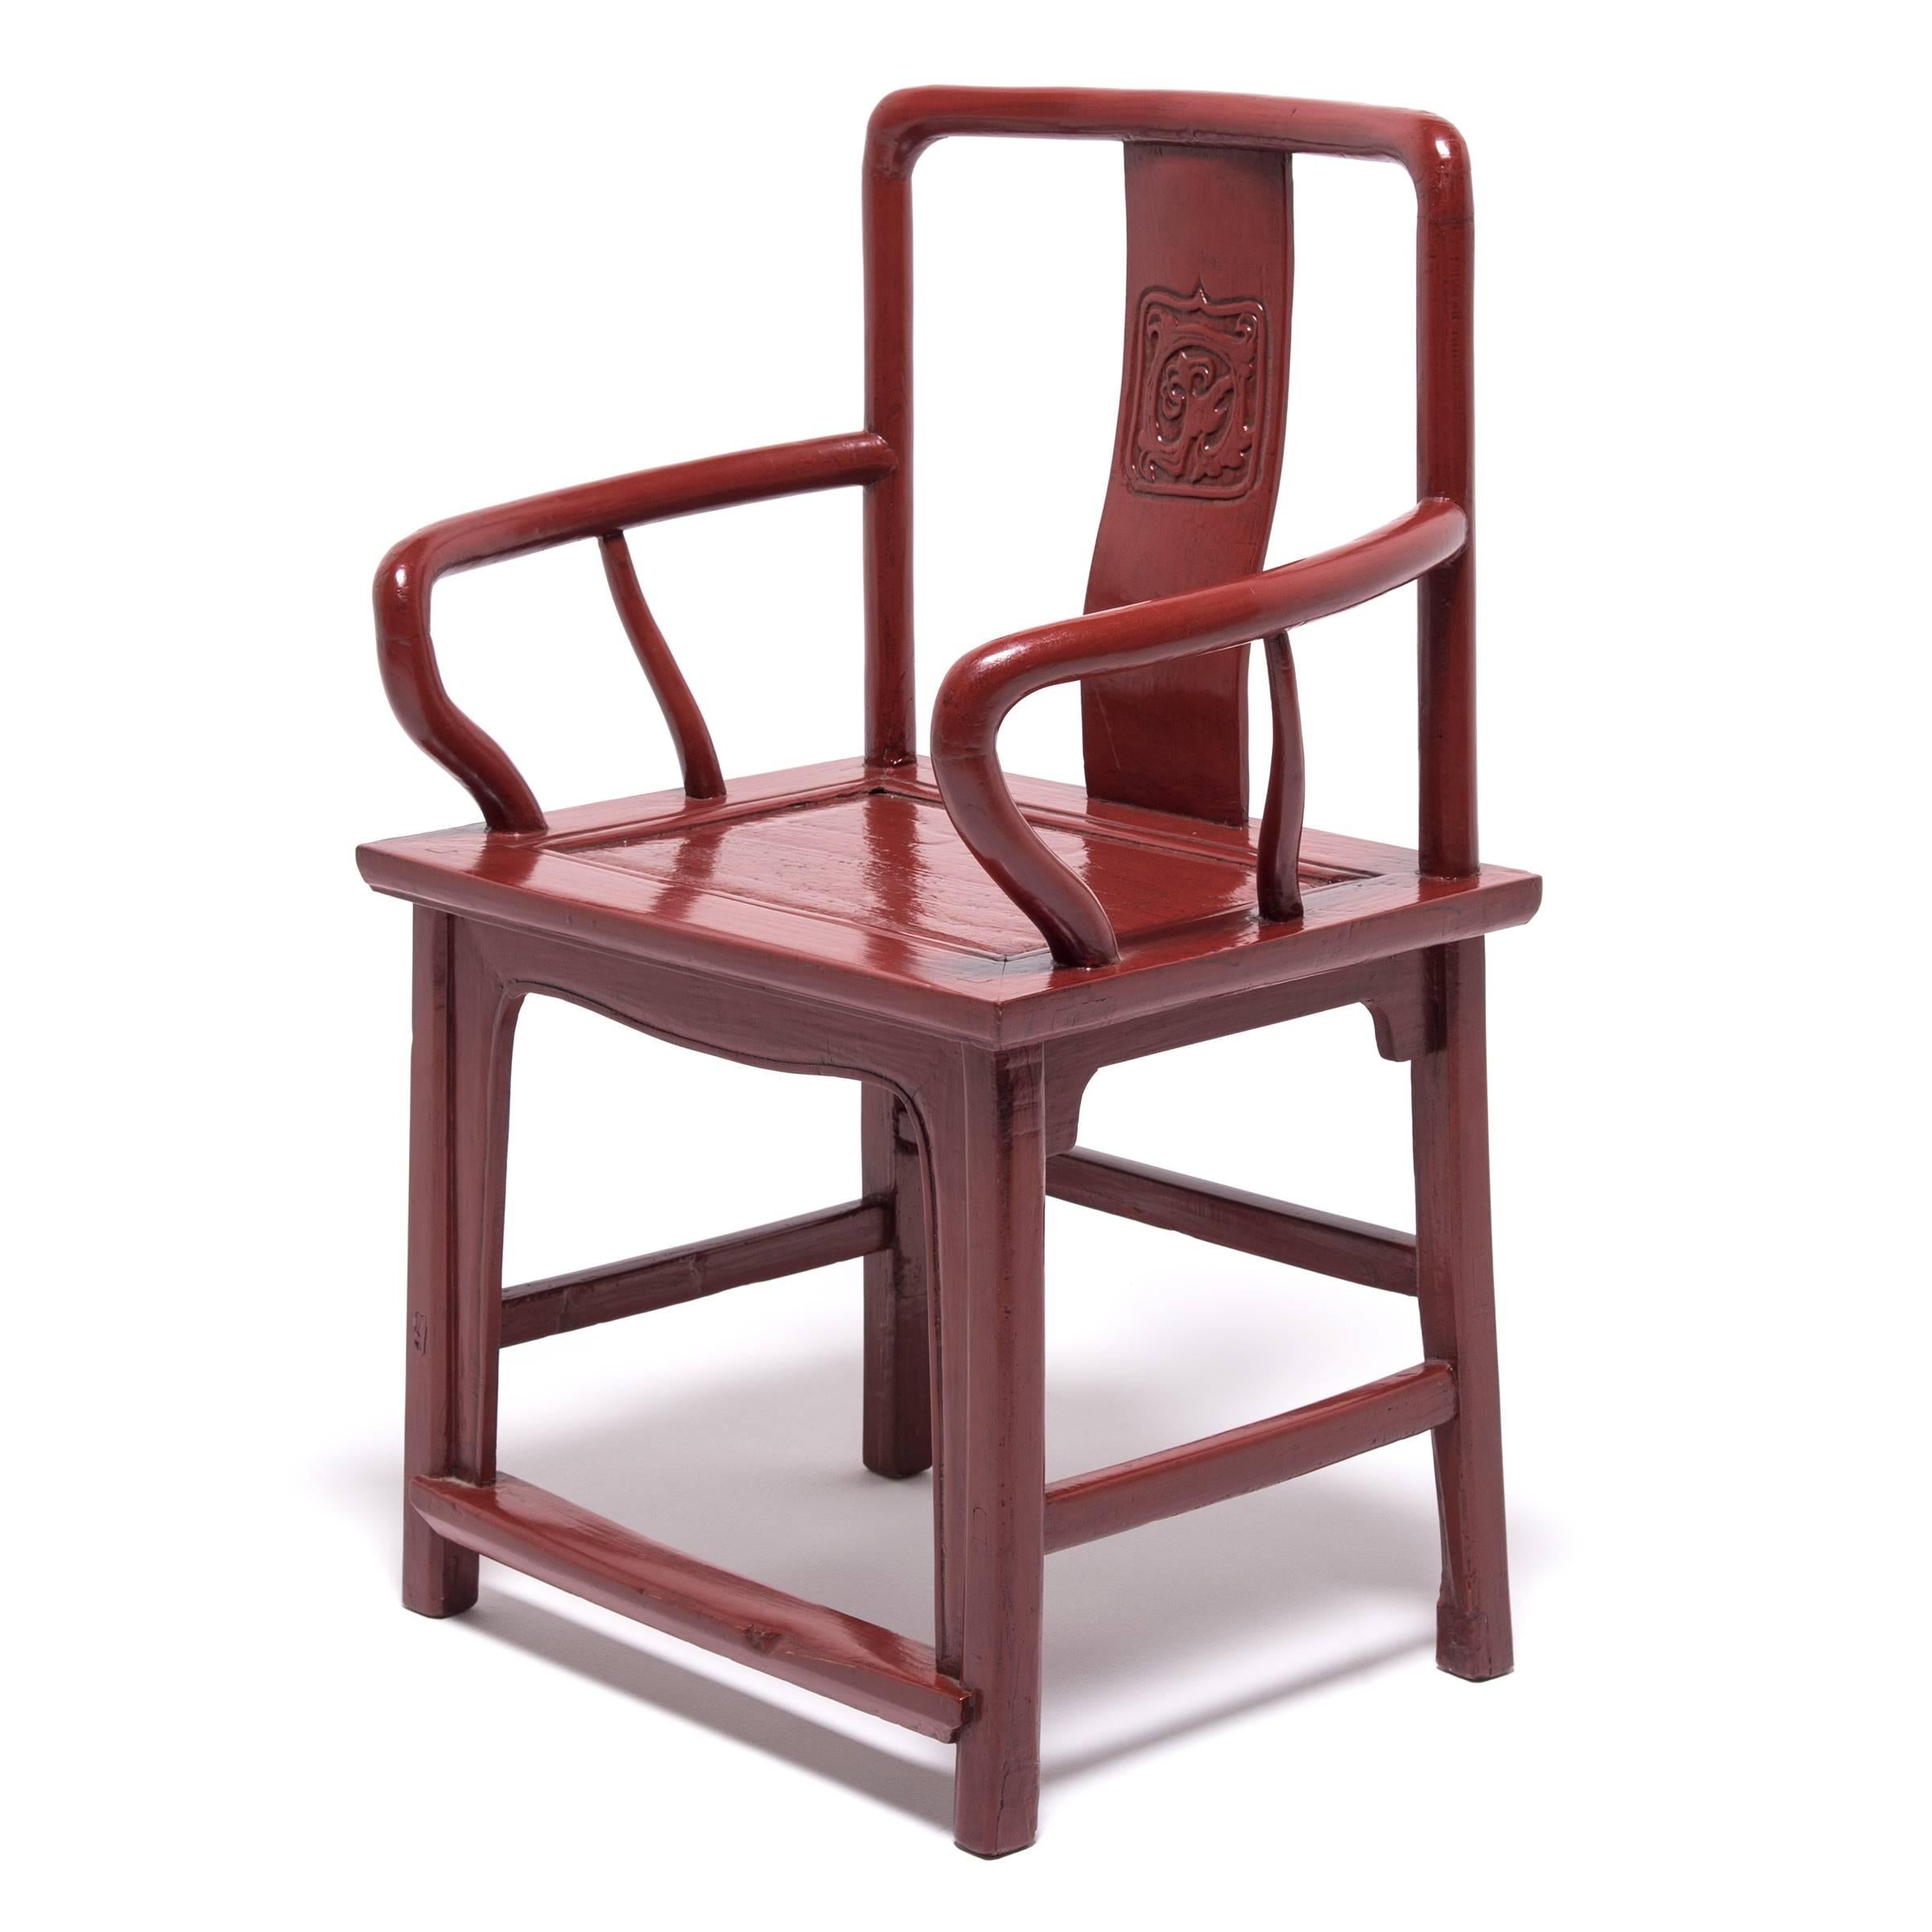 The defining characteristic of a Chinese Officials Chair is the way that the back crest rail turns continuously into the back posts. Our artisans lacquered this bold, late 19th century example from Northern China a big red, the color believed to